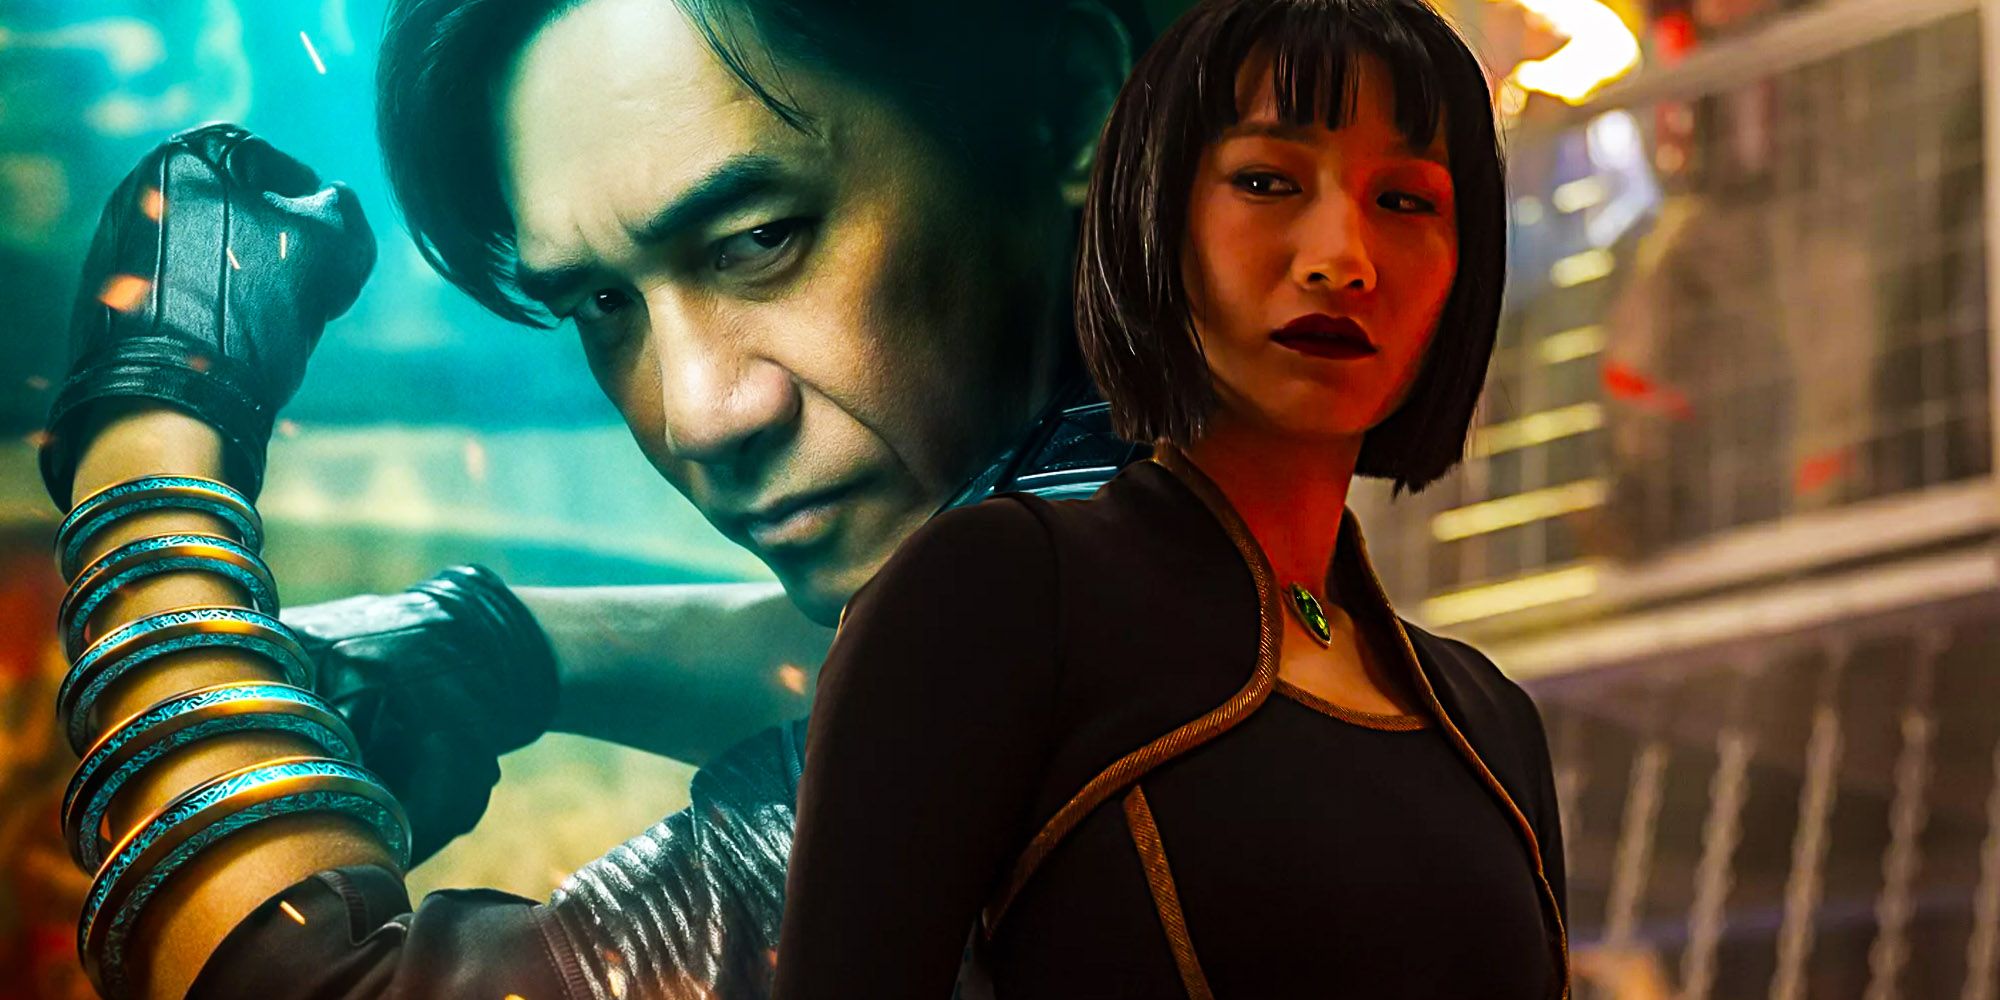 A ShangChi Easter Egg Hinted At His Sisters True Plan All Along